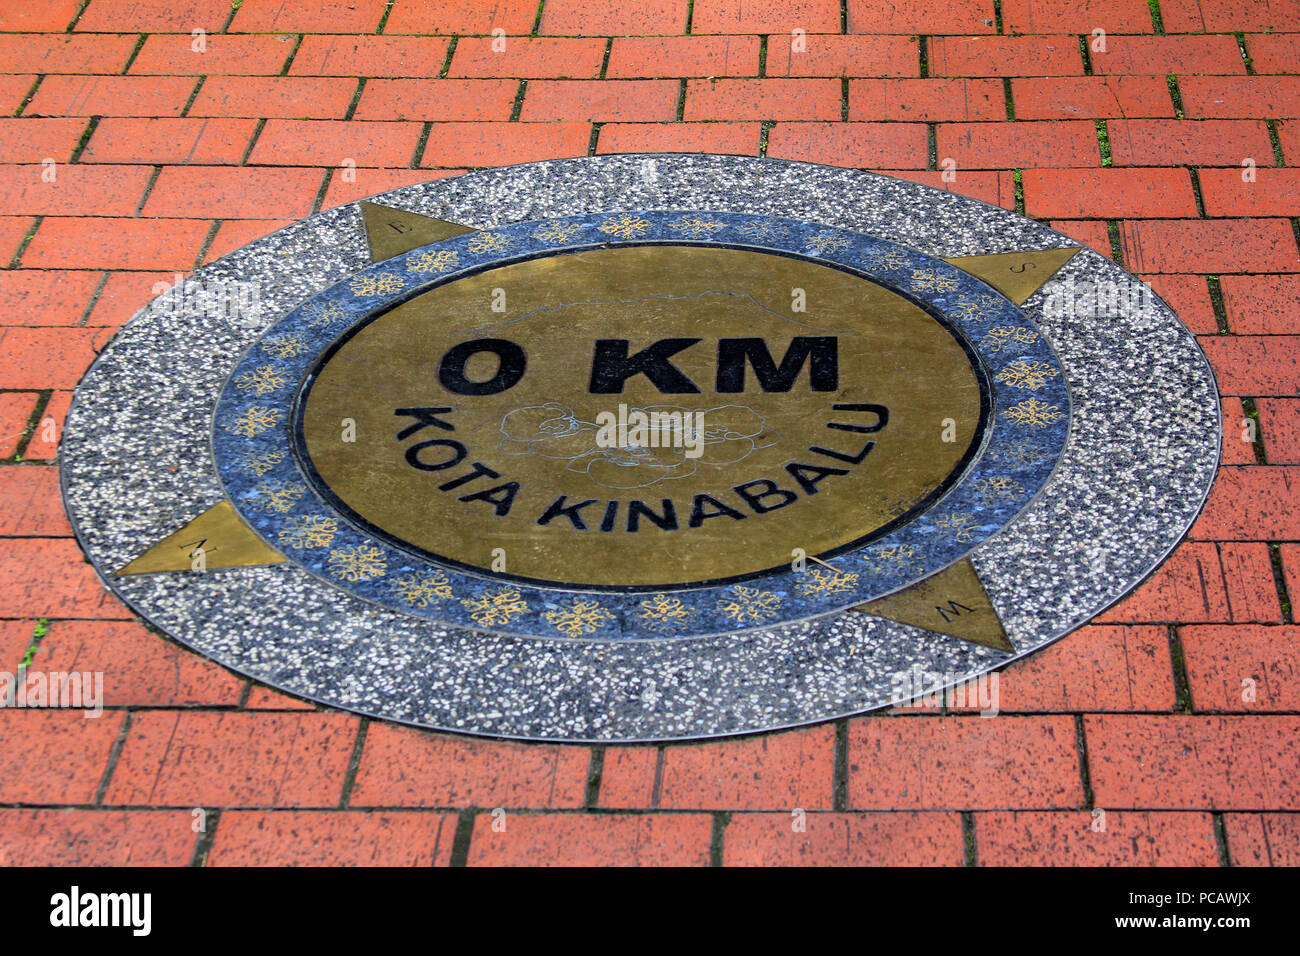 March 16, 2011 in the capital of Sabah, a memorial plaque with zero kilometers (0 km) was opened and is expected to become another tourist attraction. Stock Photo